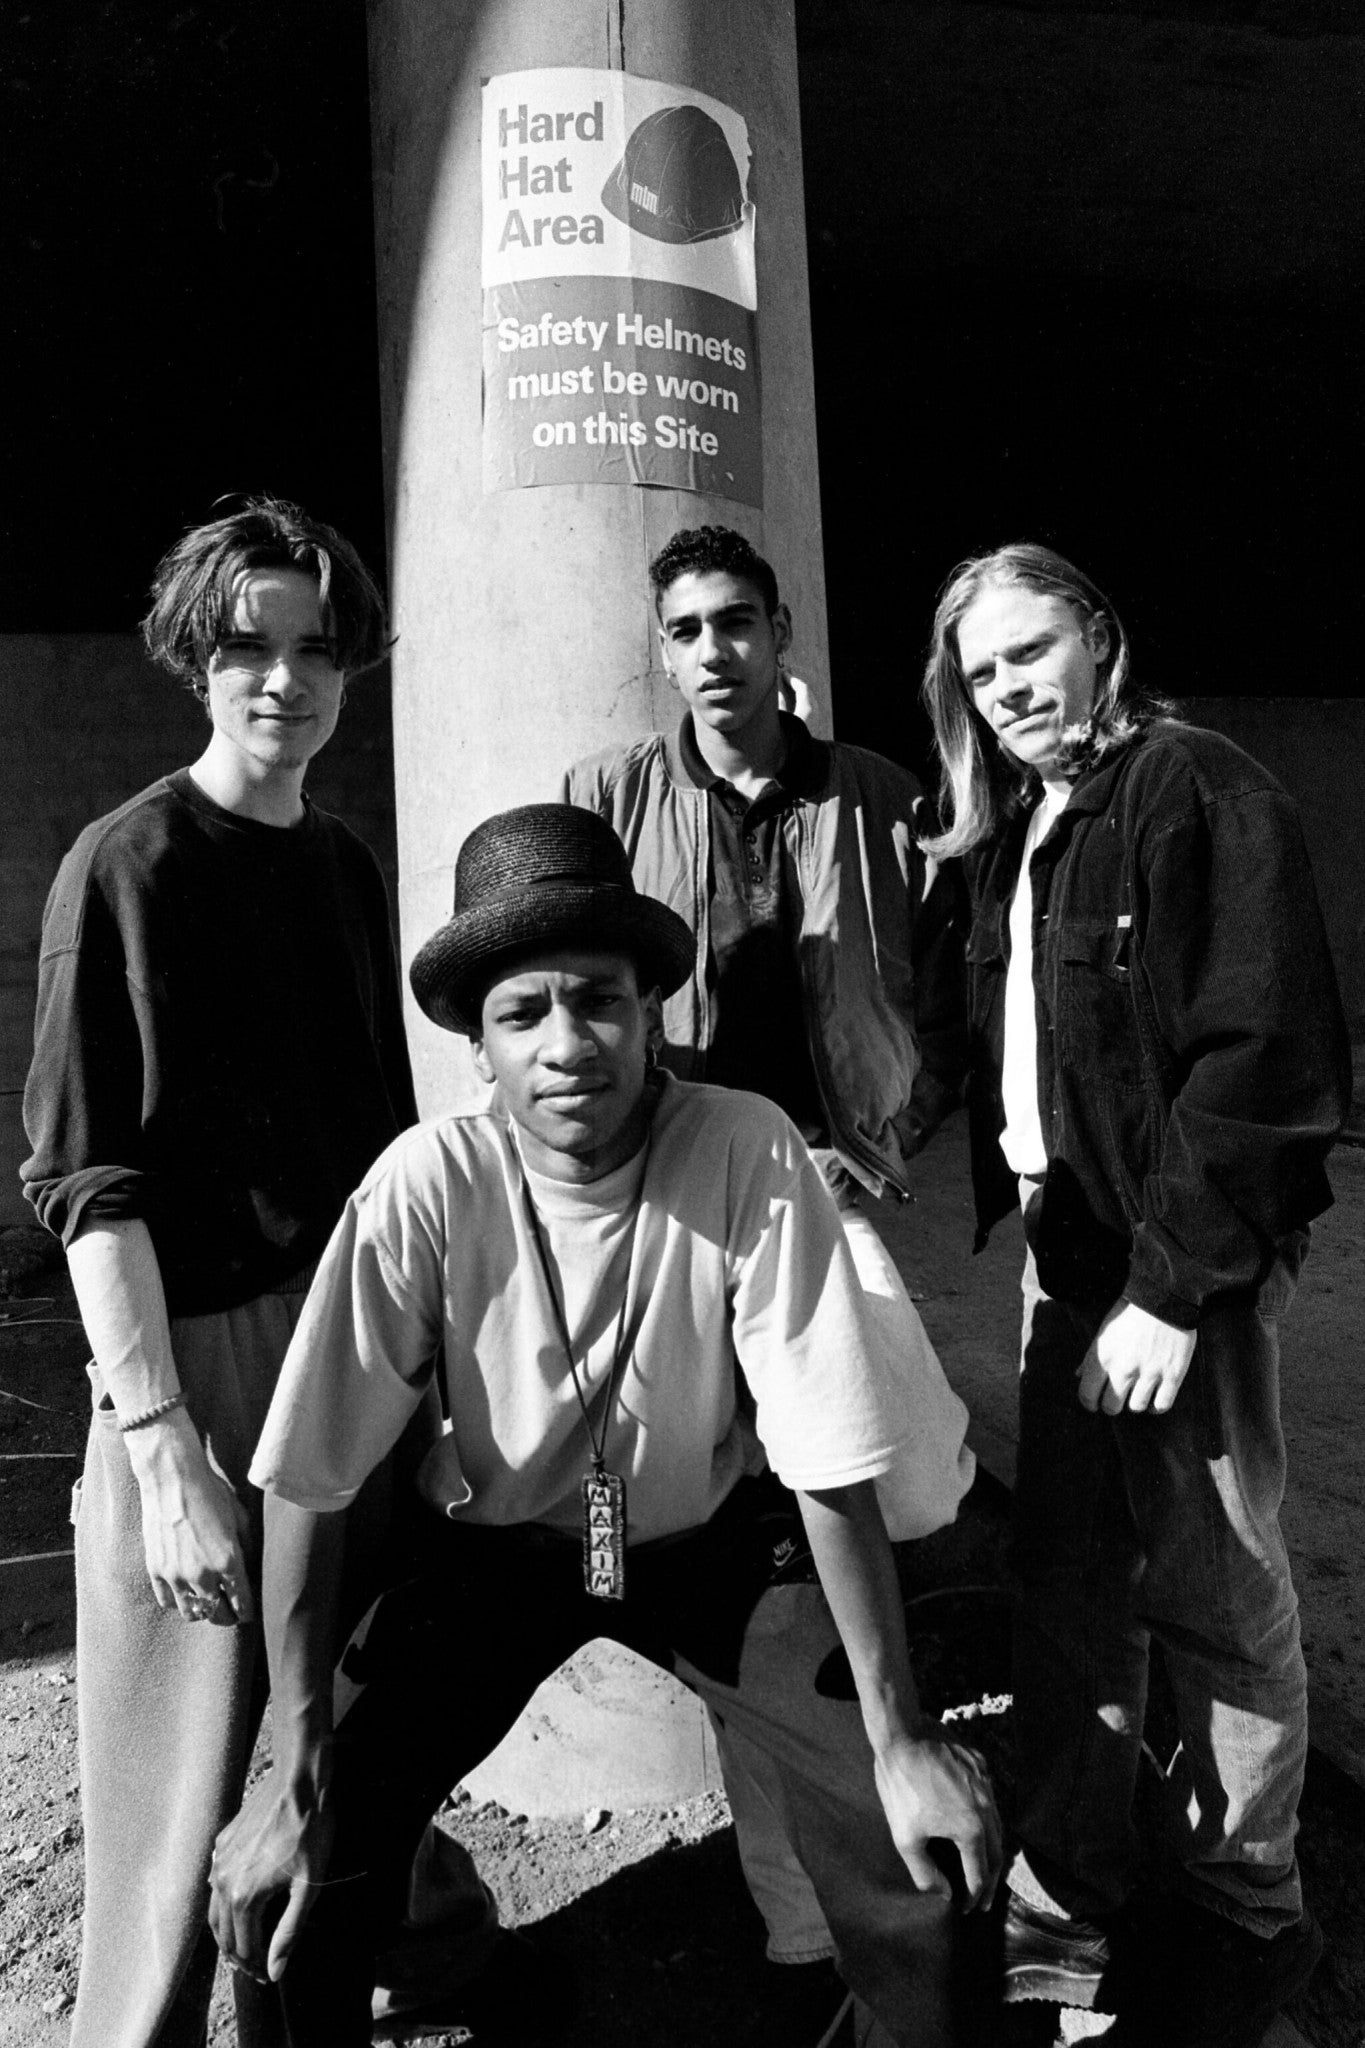 The Prodigy - Band Photoshoot in London, England, 1991 Poster (1/2)